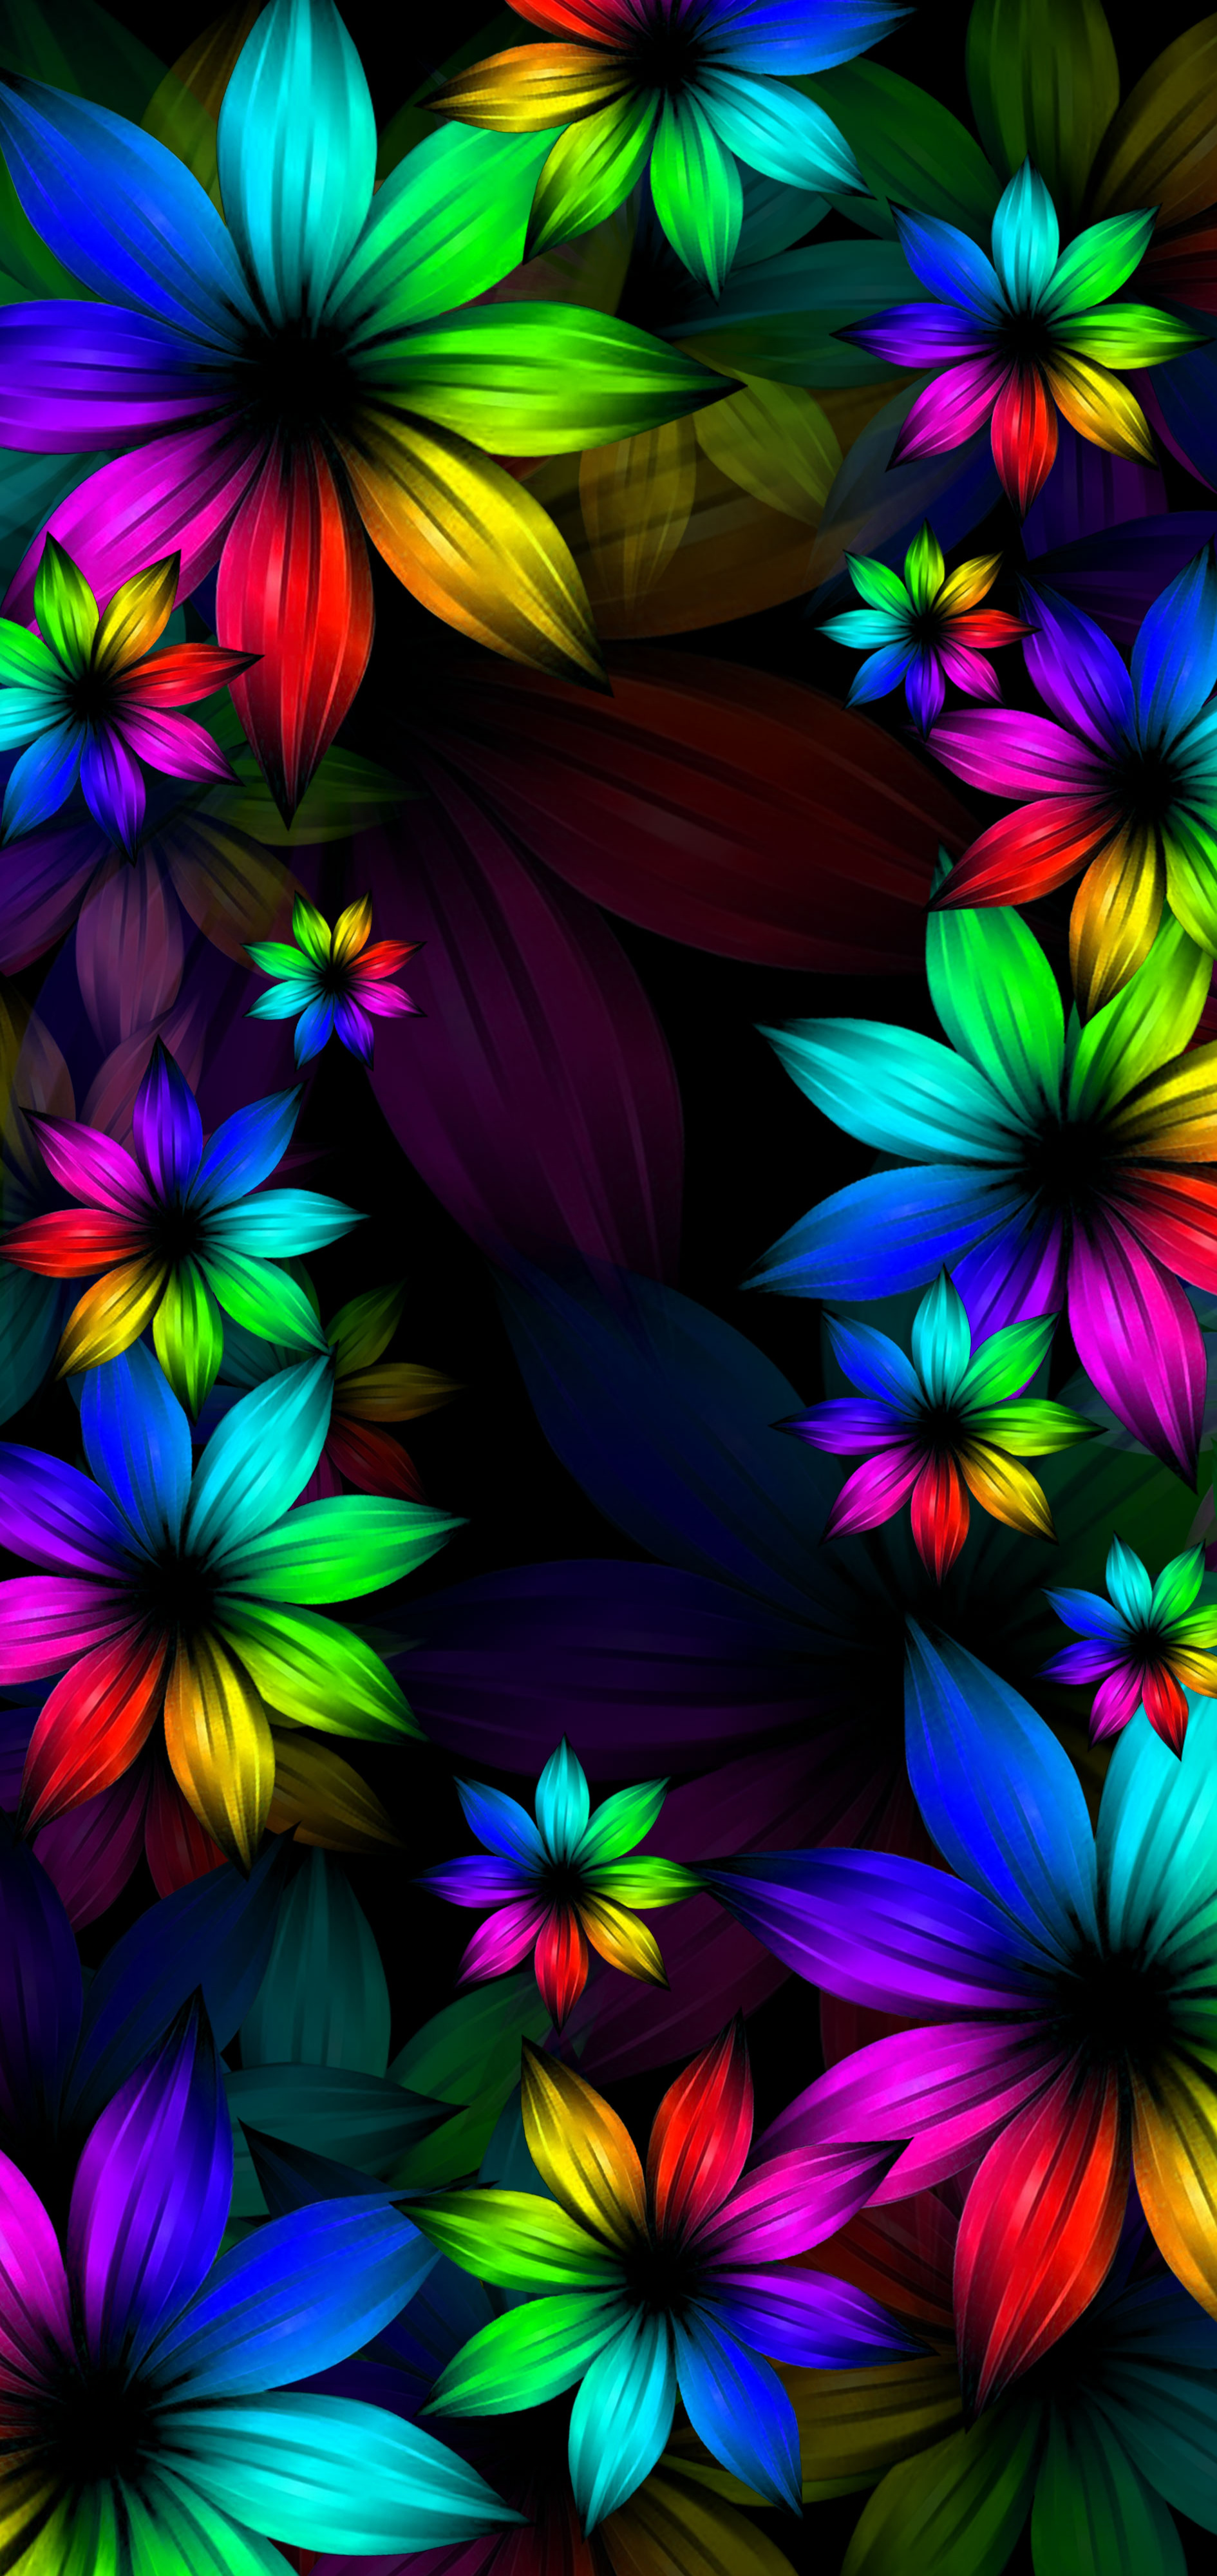 Bright And Colorful Flower Wallpapers Background 3d Drawing Wallpaper Colorful  Flowers Digital Art Hd Photography Photo Background Image And Wallpaper  for Free Download